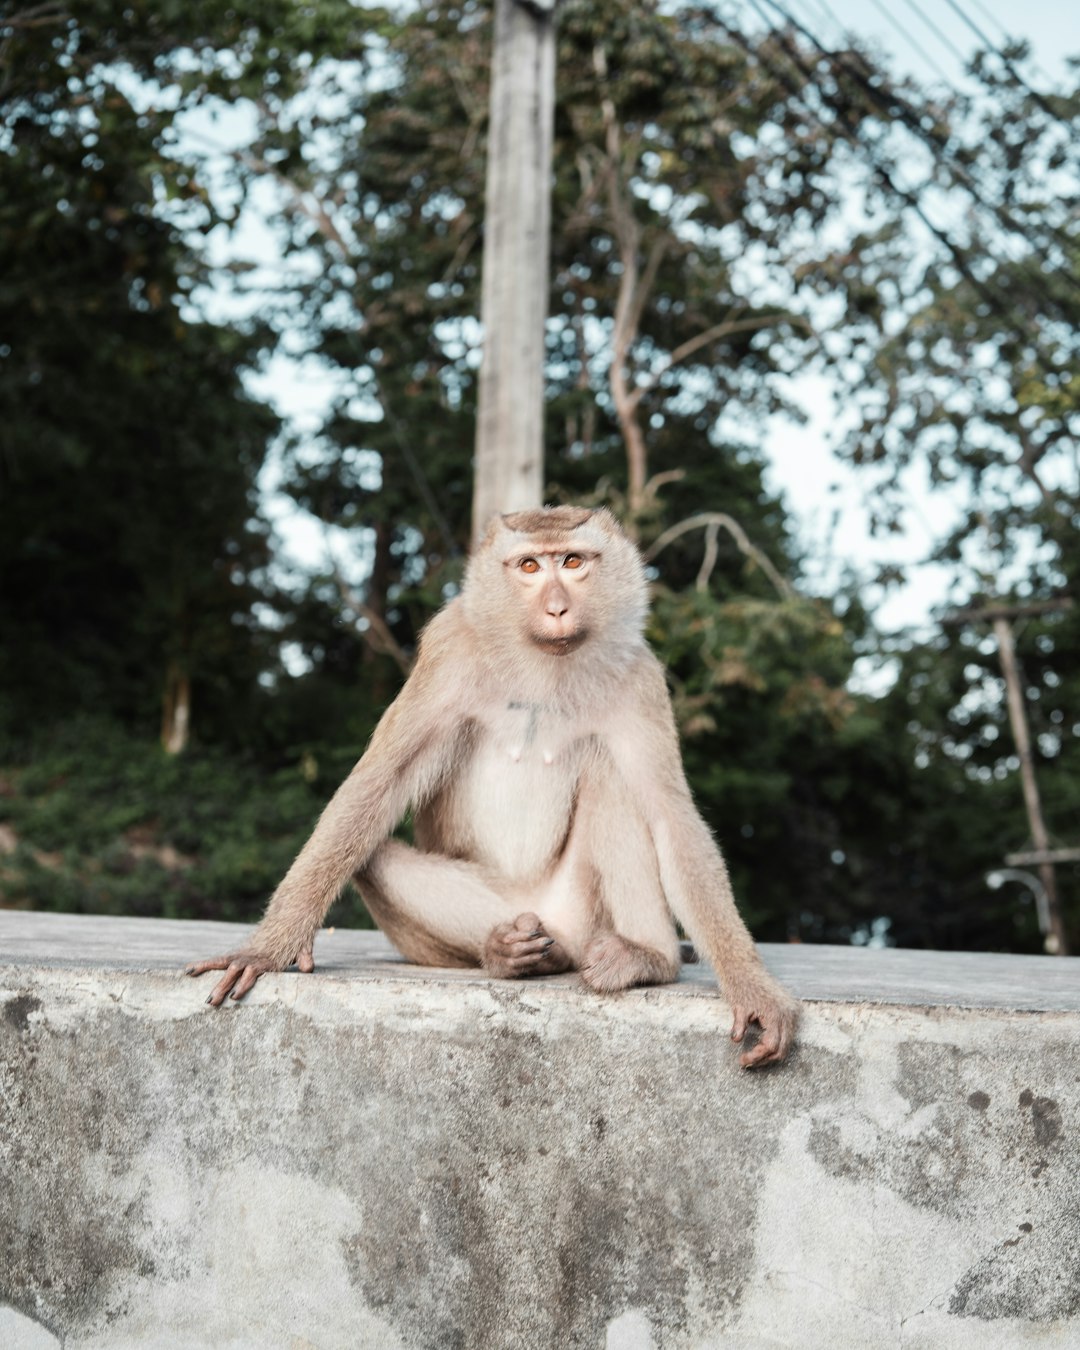 brown monkey sitting on concrete wall during daytime